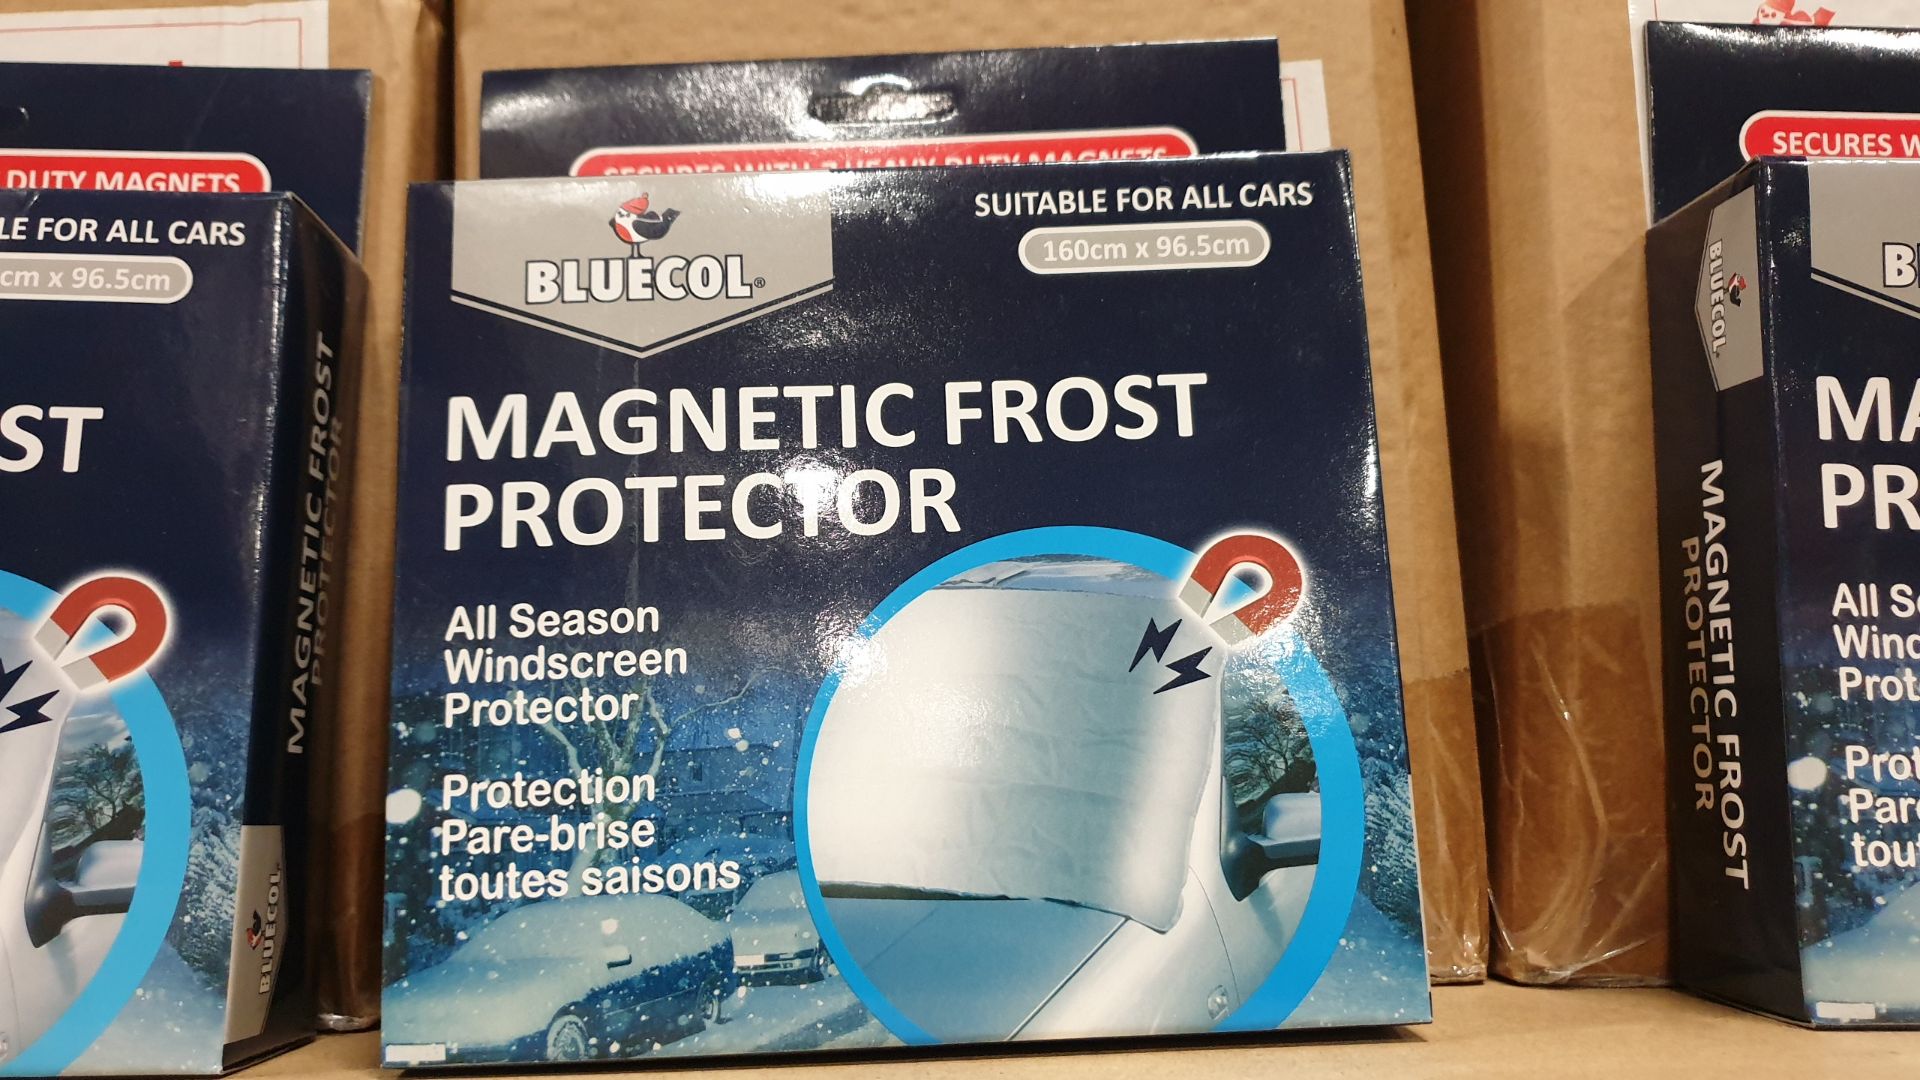 132 X BRAND NEW BLUECOL MAGNETIC FROST PROTECTORS FOR ALL SEASON, (160 X 96.5CM) - IN 11 BOXES